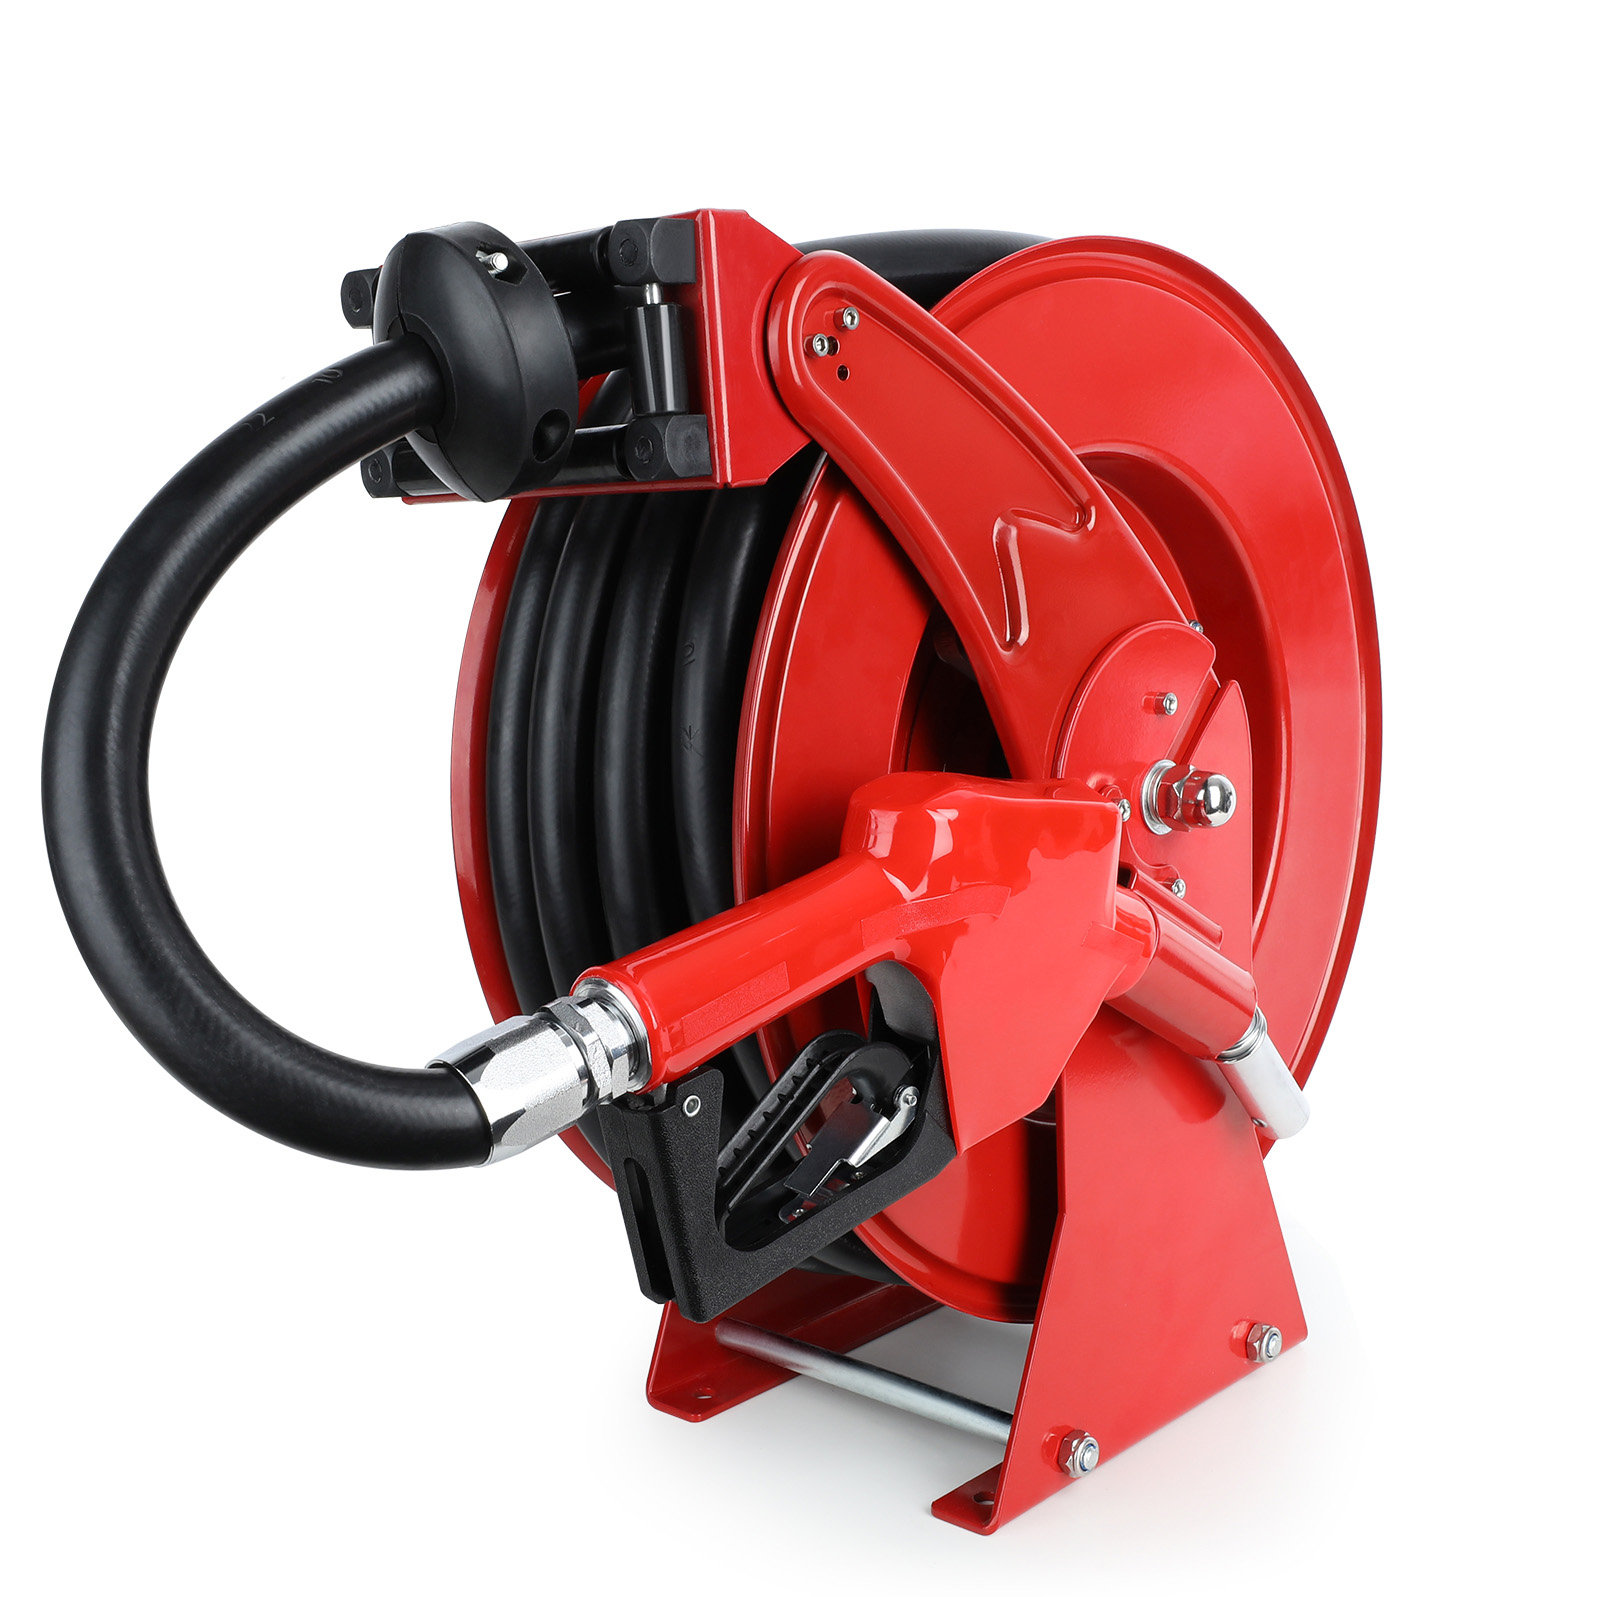 Fuel Hose Reel Retractable with Fueling Nozzle 3/4 x 50' Spring Driven Diesel Hose Reel 300 PSI Domccy Finish: Red